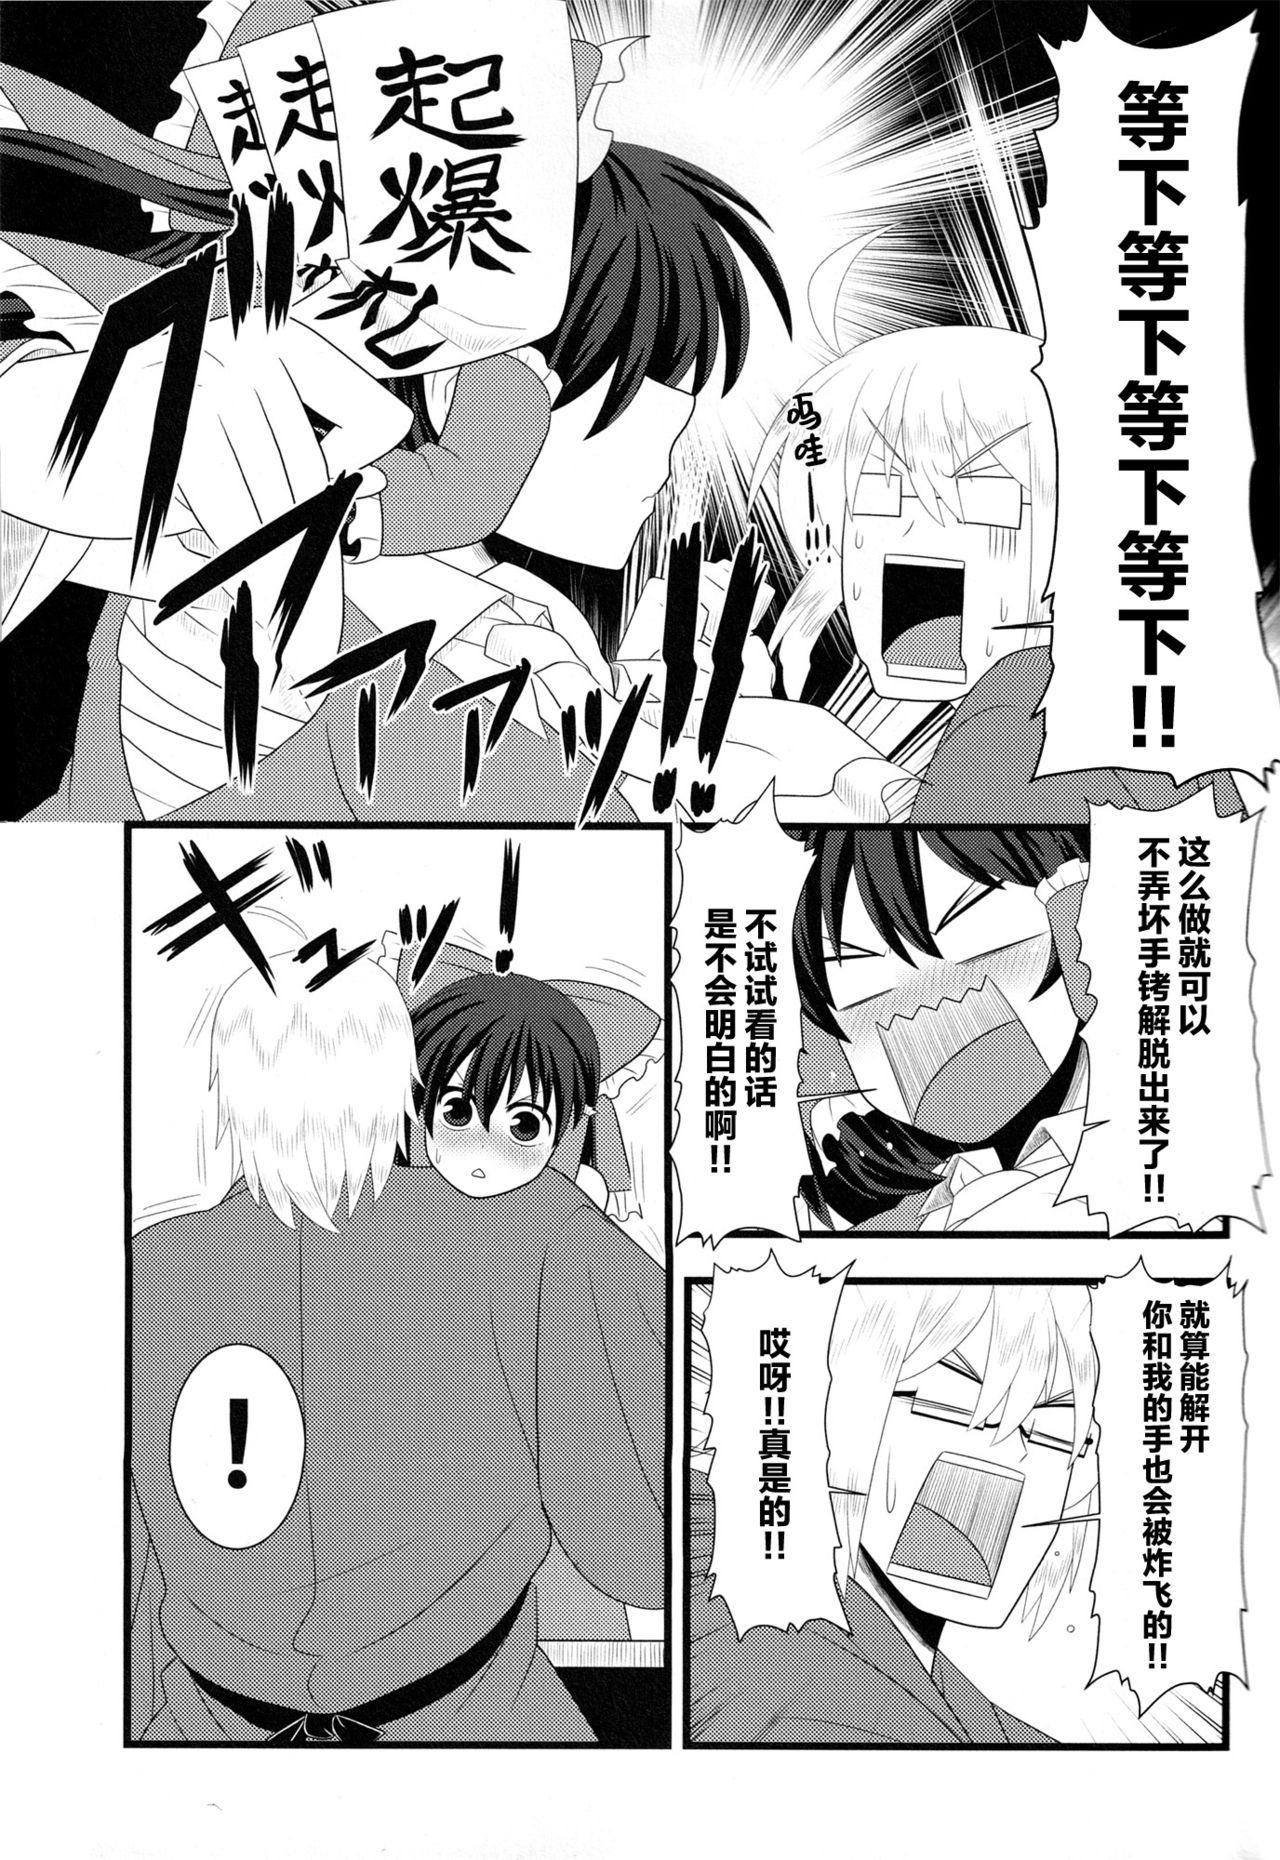 Old Vs Young Kyou no Kourindou - Touhou project Rough Sex - Page 8